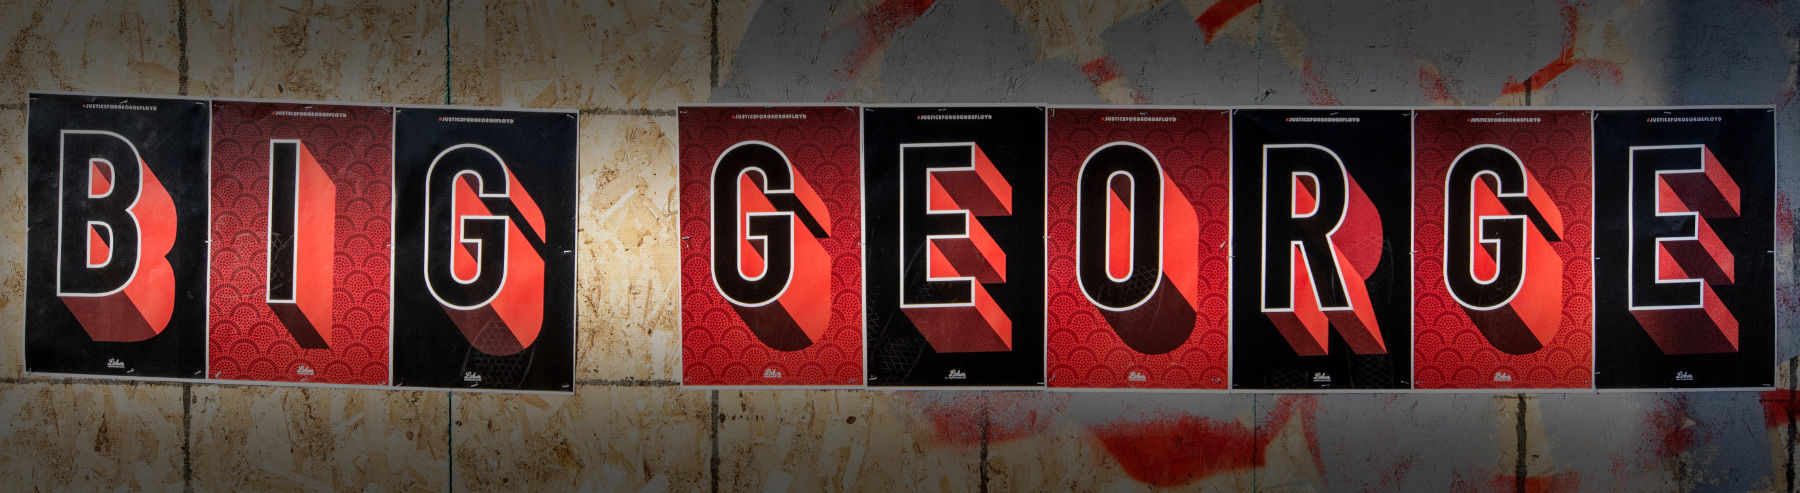 Sign hanging on plywood with red and black 3D letter blocks spelling "BIG GEORGE"